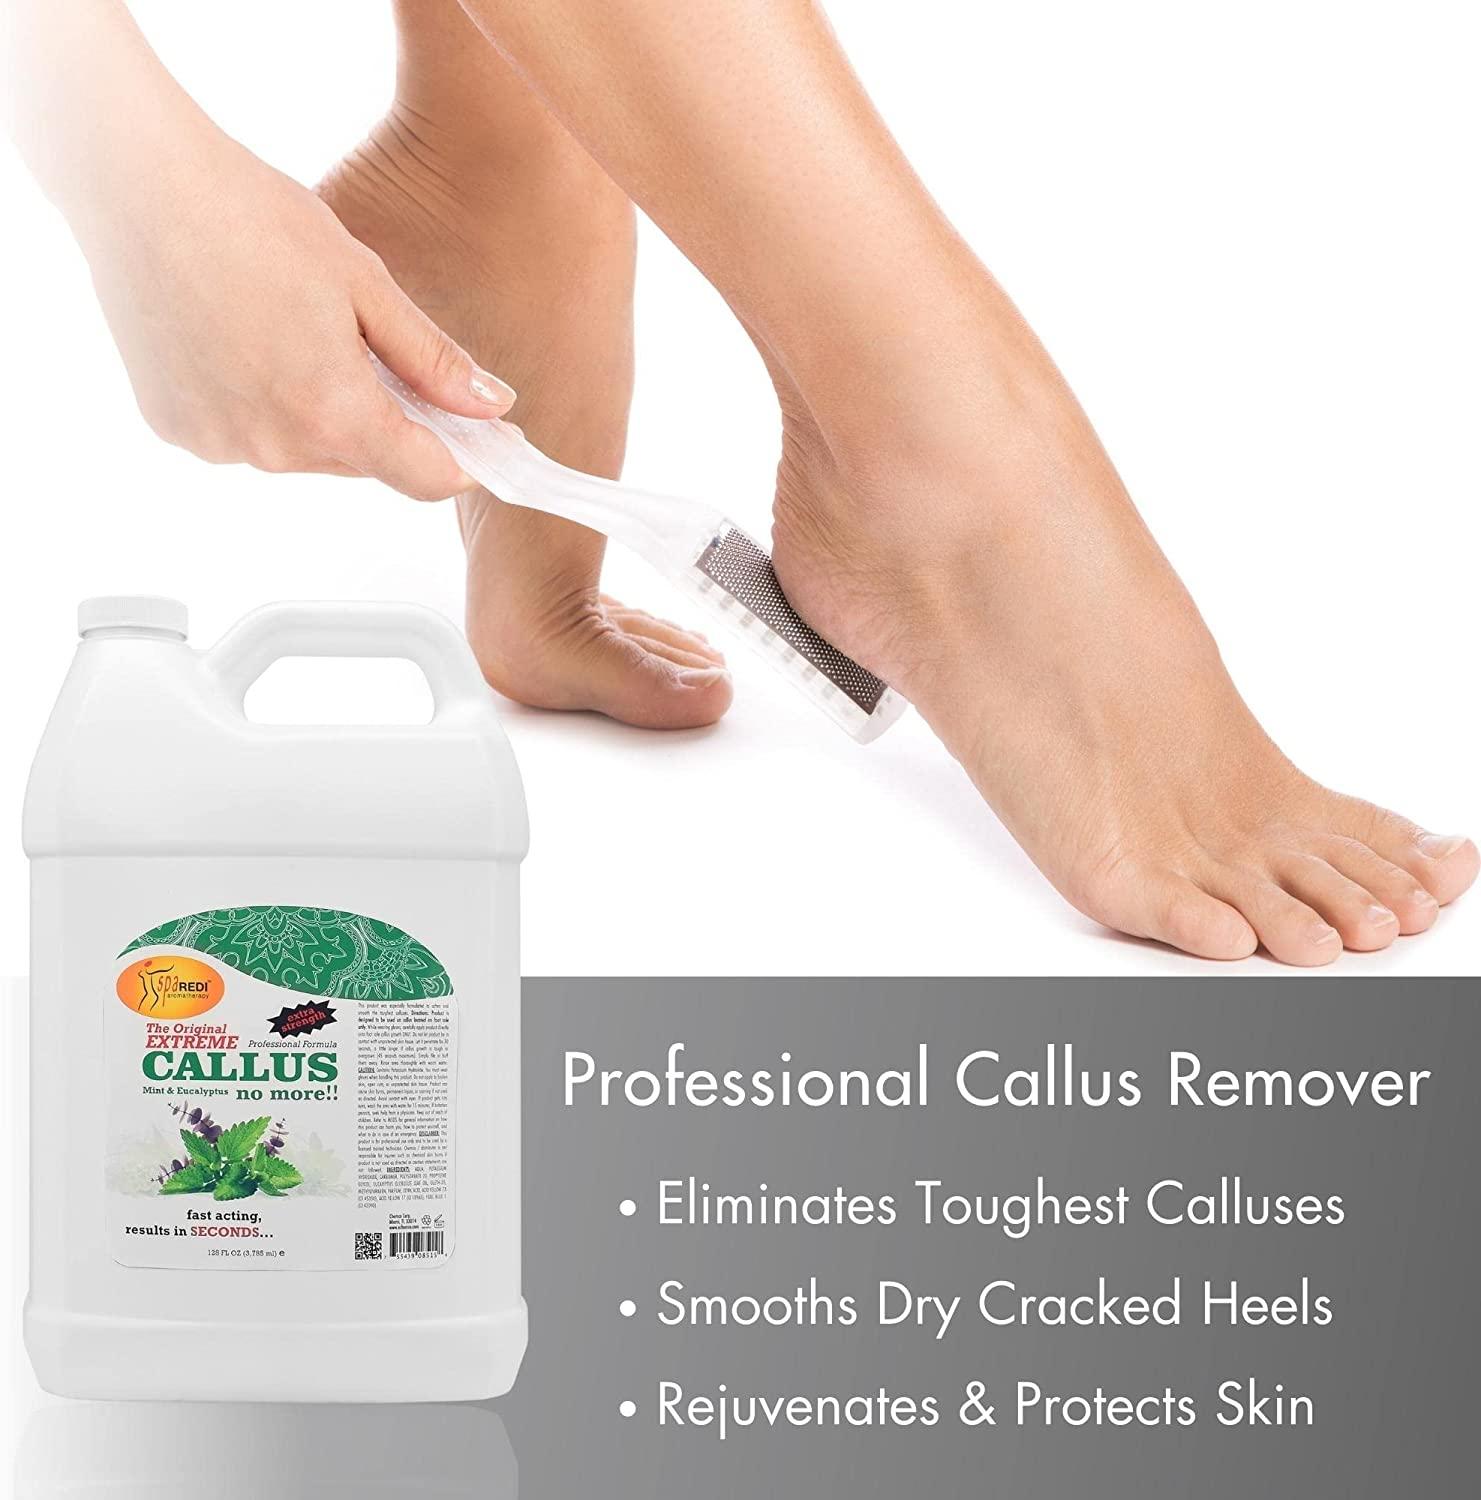 SPA REDI - Callus Remover for Feet Gel, Mint and Eucalyptus, 128 Oz -  Professional Pedicure Foot Care - Removes Toughest Calluses in Seconds and  Smooths Dry Cracked Heels